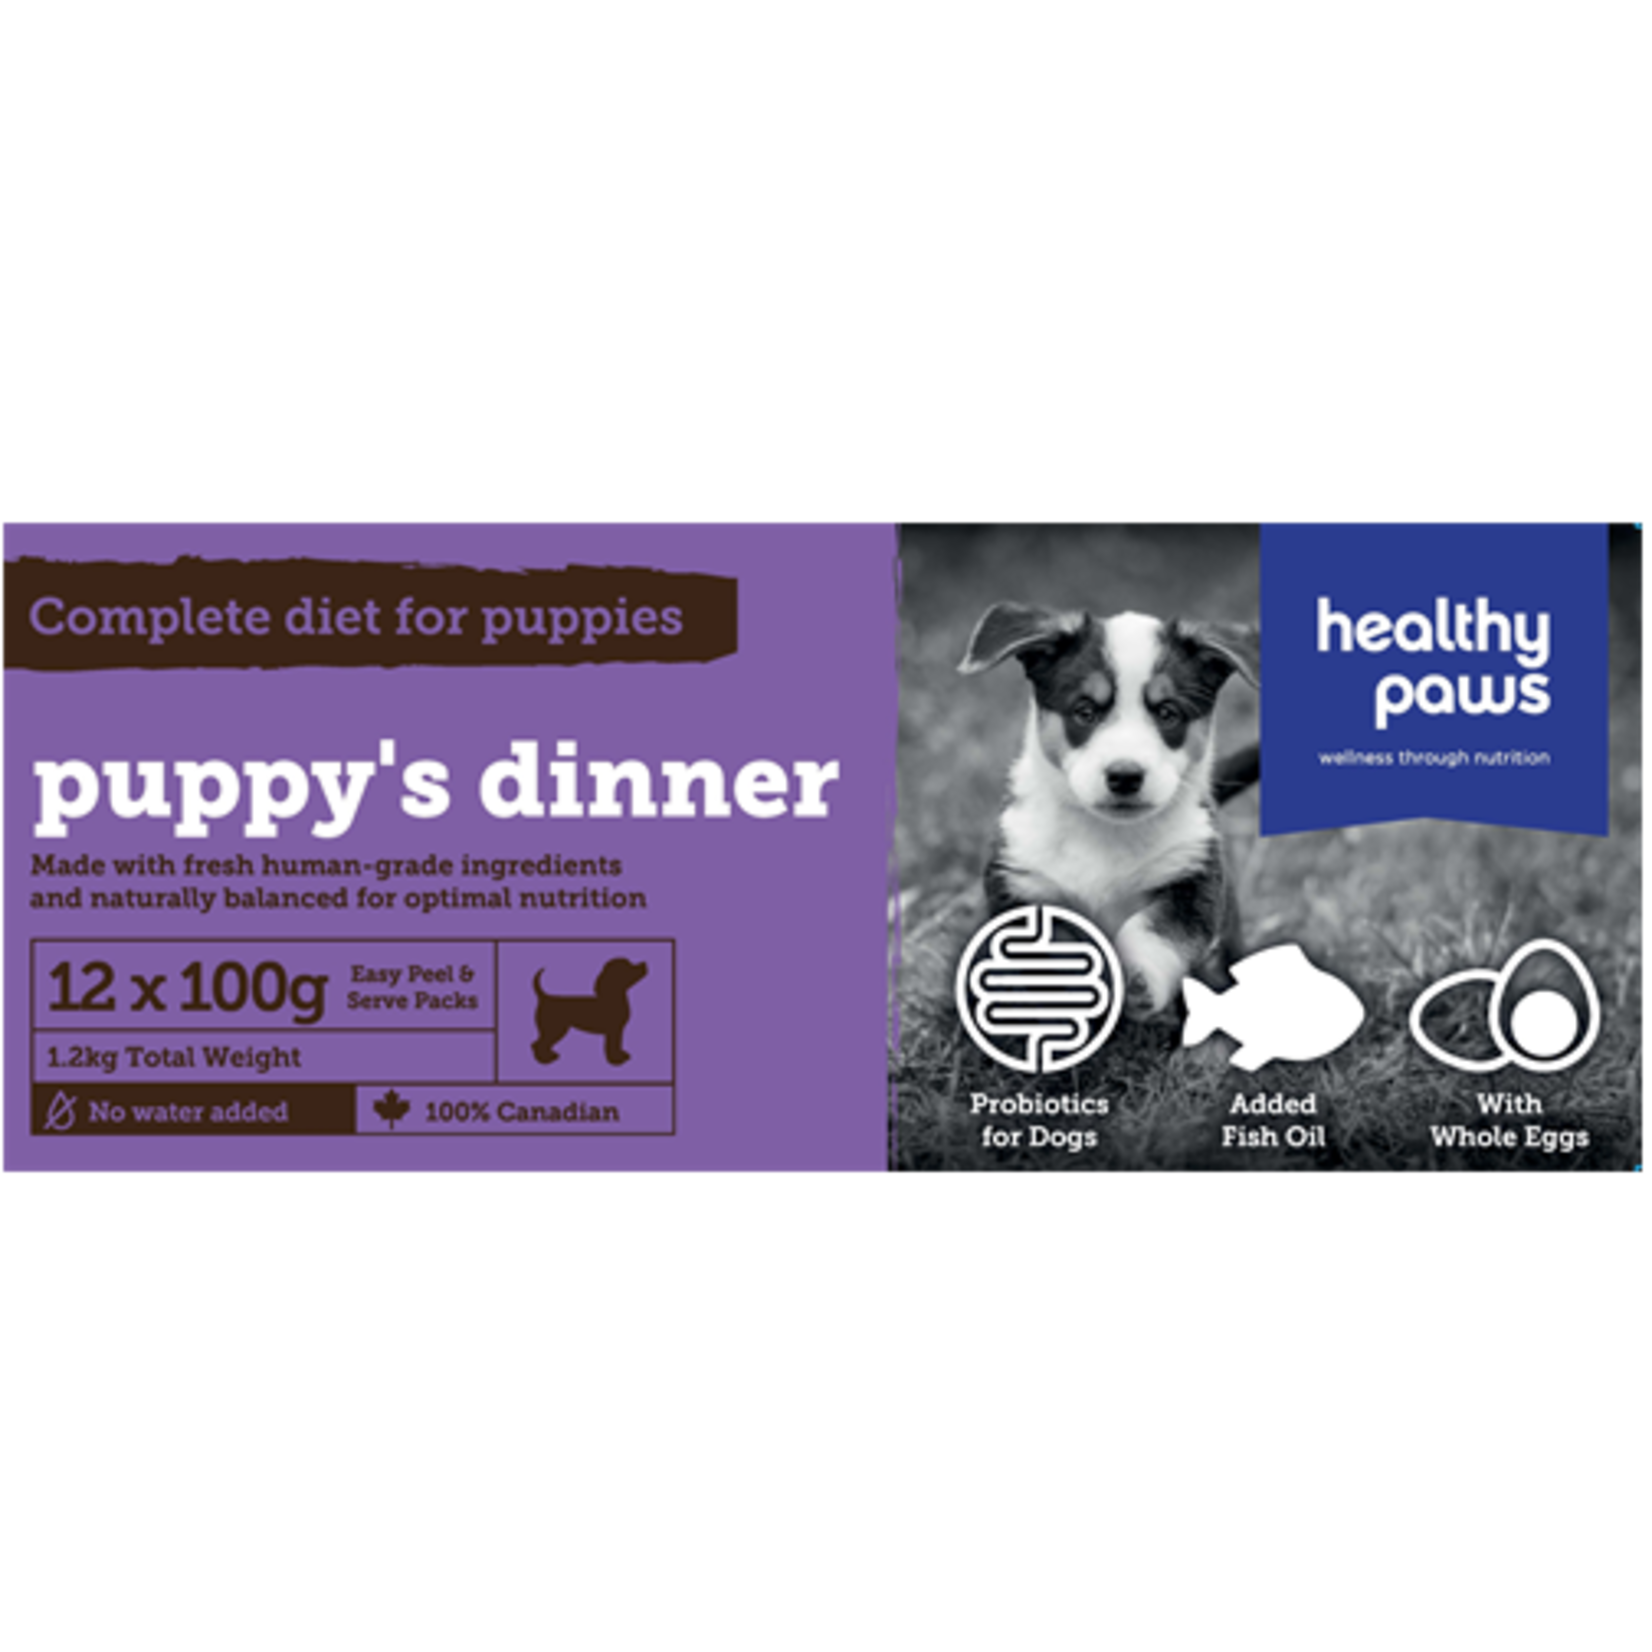 HEALTY PAWS Healthy Paws Complete Dog Puppy Dinner 12 x 100g